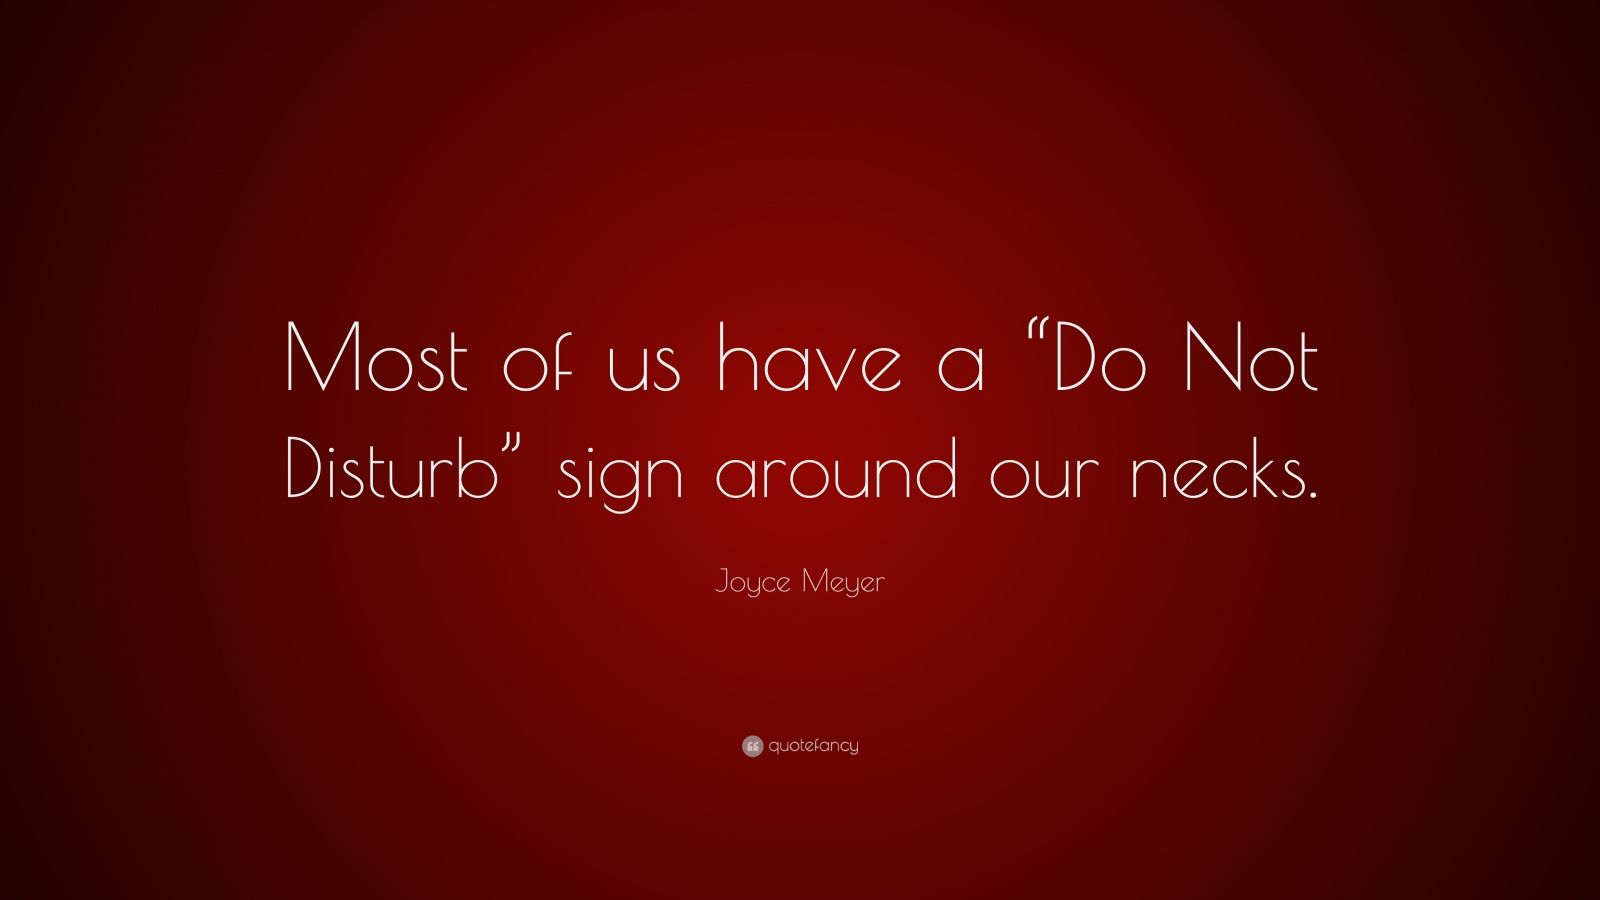 Joyce Meyer Quote: “Most of us have a “Do Not Disturb” sign around